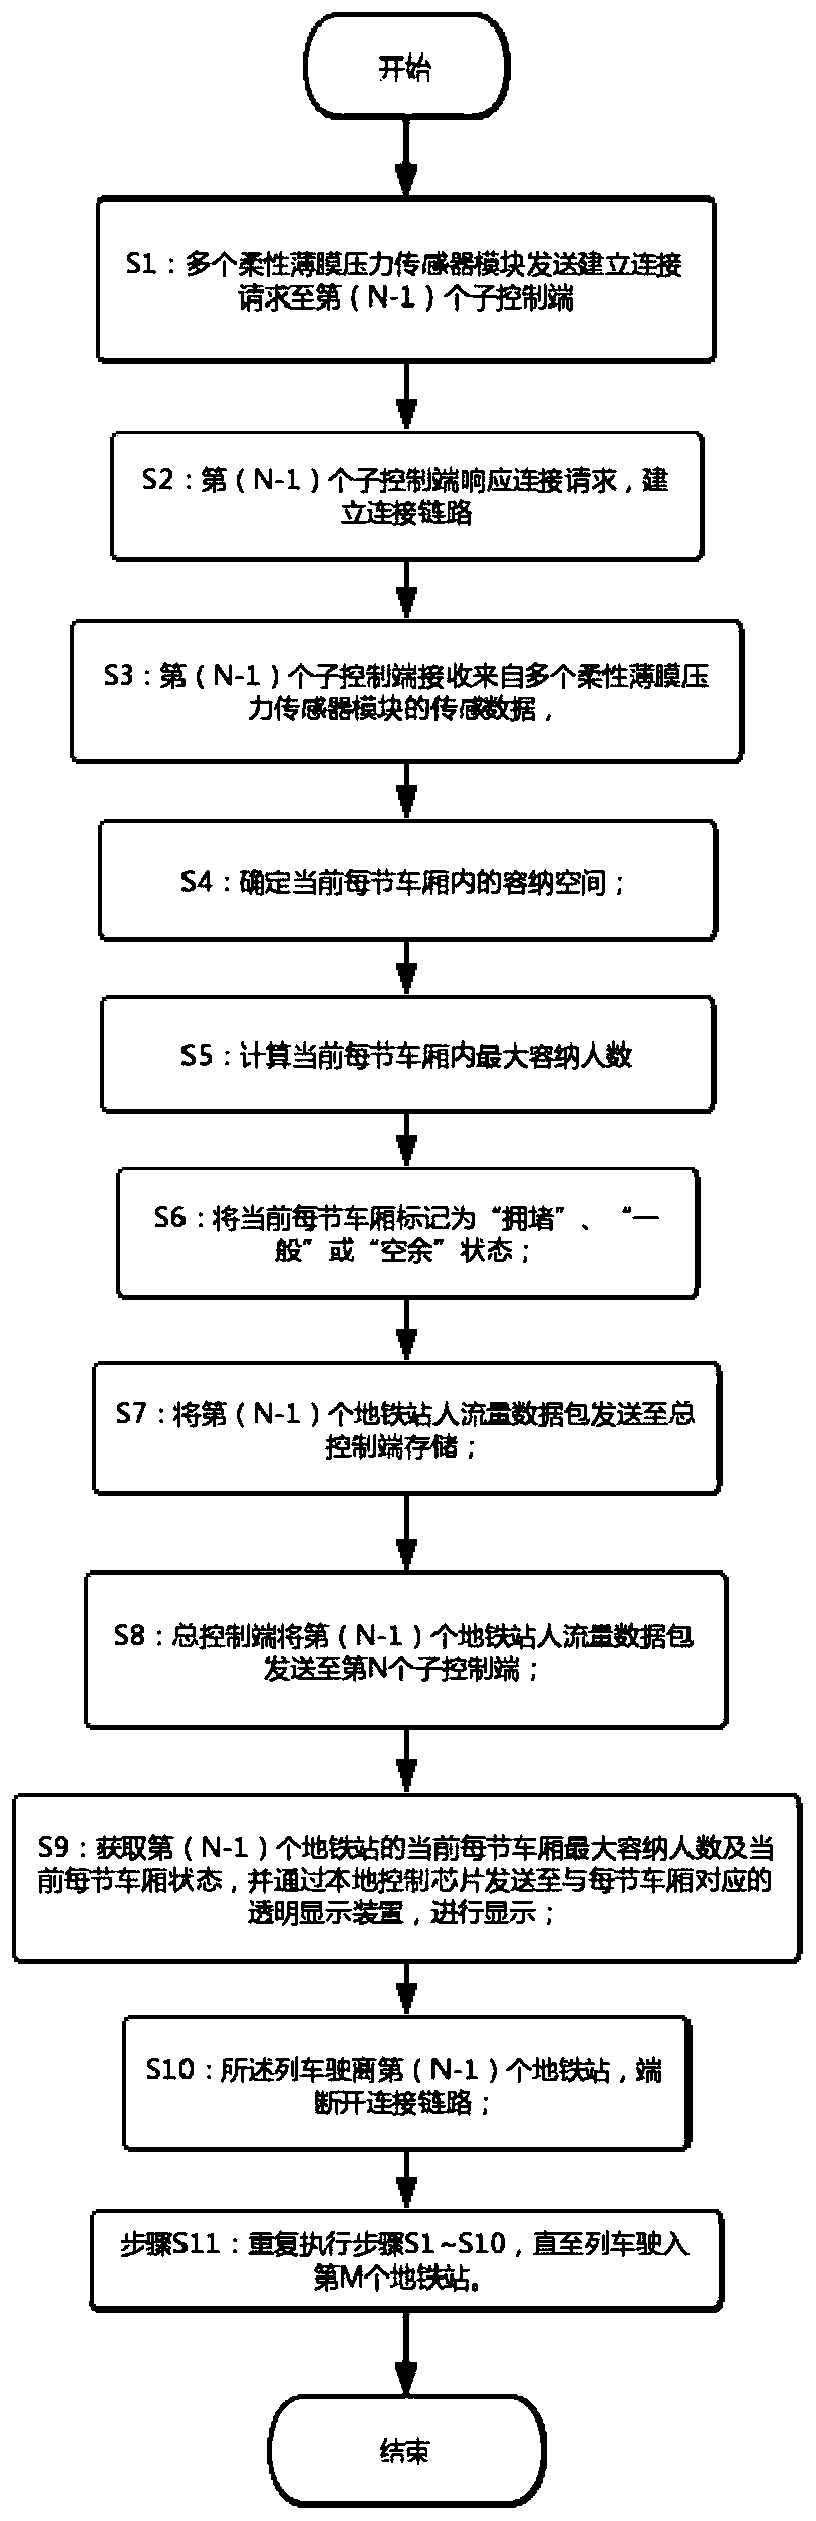 Train passenger flow management system based transparent display device, and method thereof